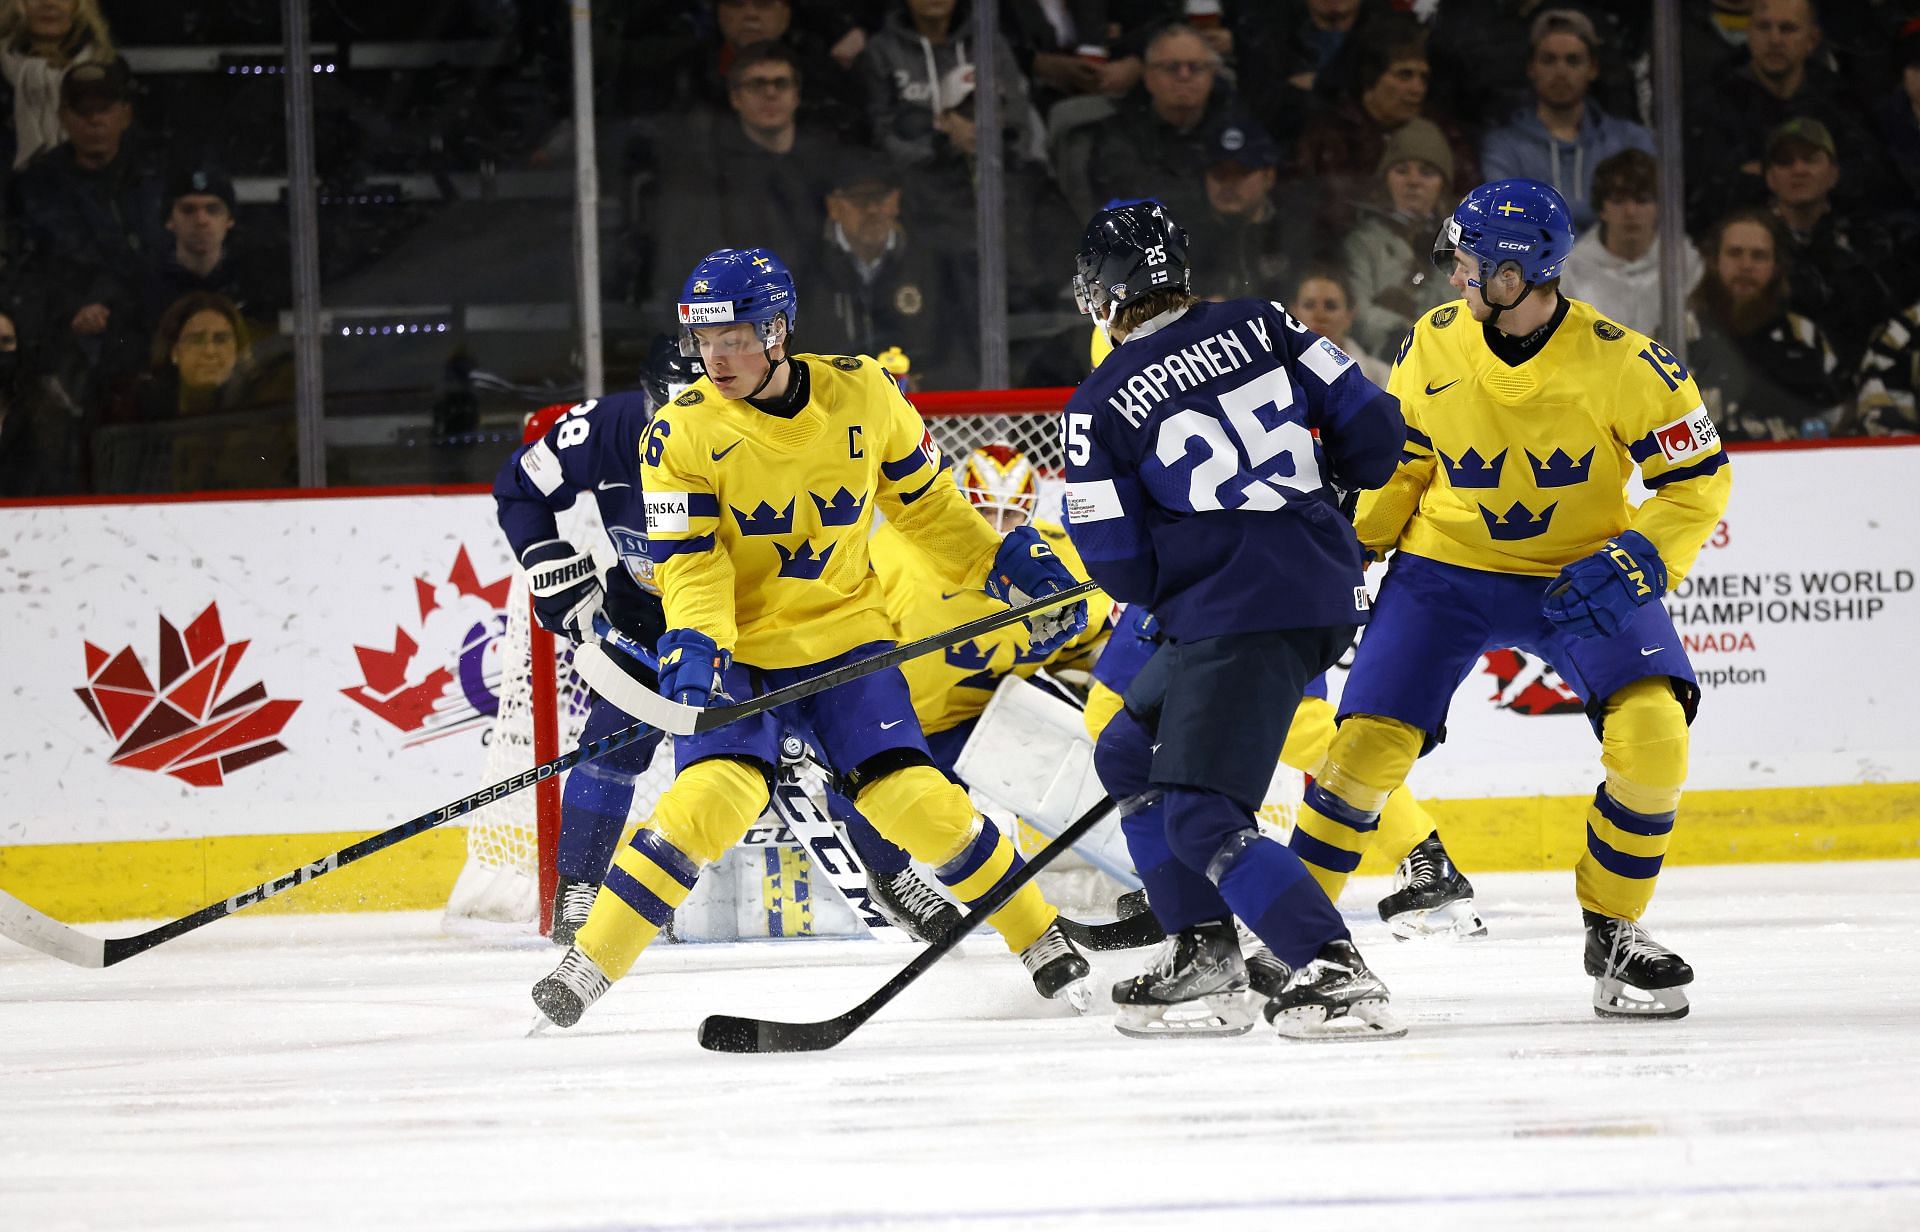 Sweden vs Finland Group A How to watch, live streaming, channel list and more